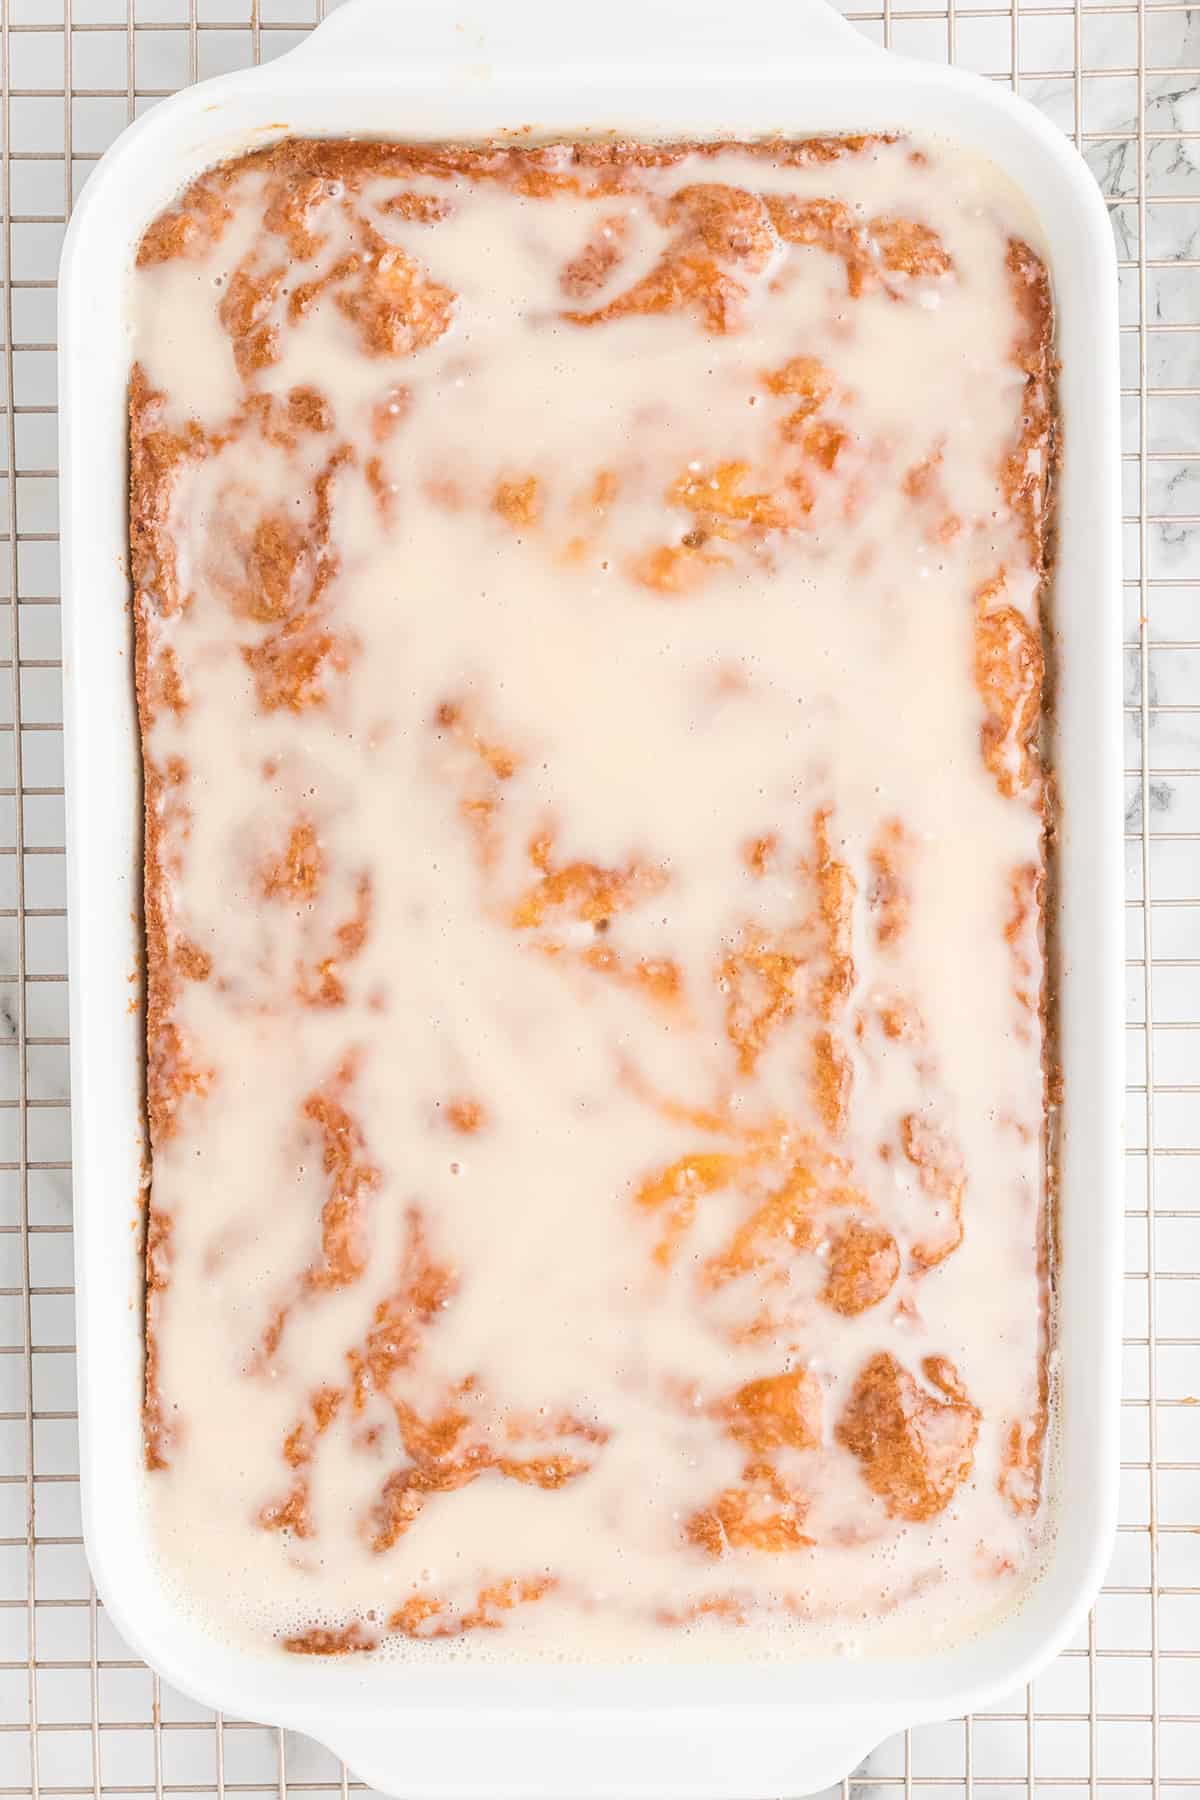 Cooled cake topped with vanilla glaze.